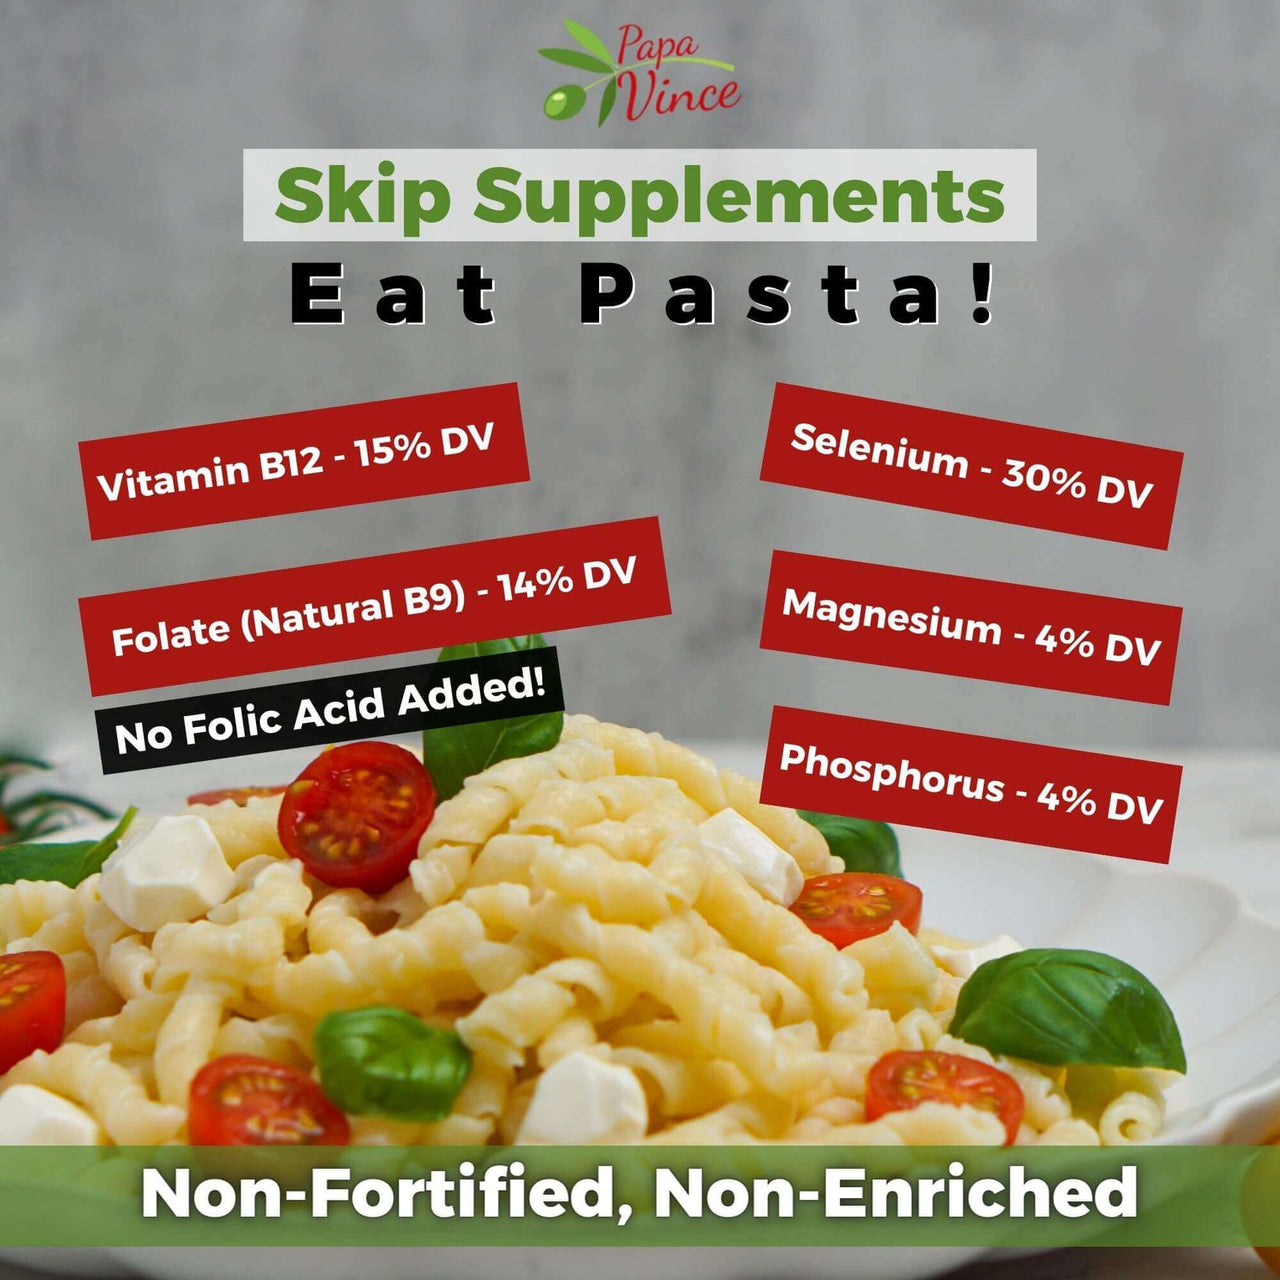 Papa Vince Non Enriched Pasta. Non Fortified Pasta. High in Selenium. High in Manganese. High in Folate. High in B9. High in B Complex. High in Magnesium. High in Phosphorus. High in B12.